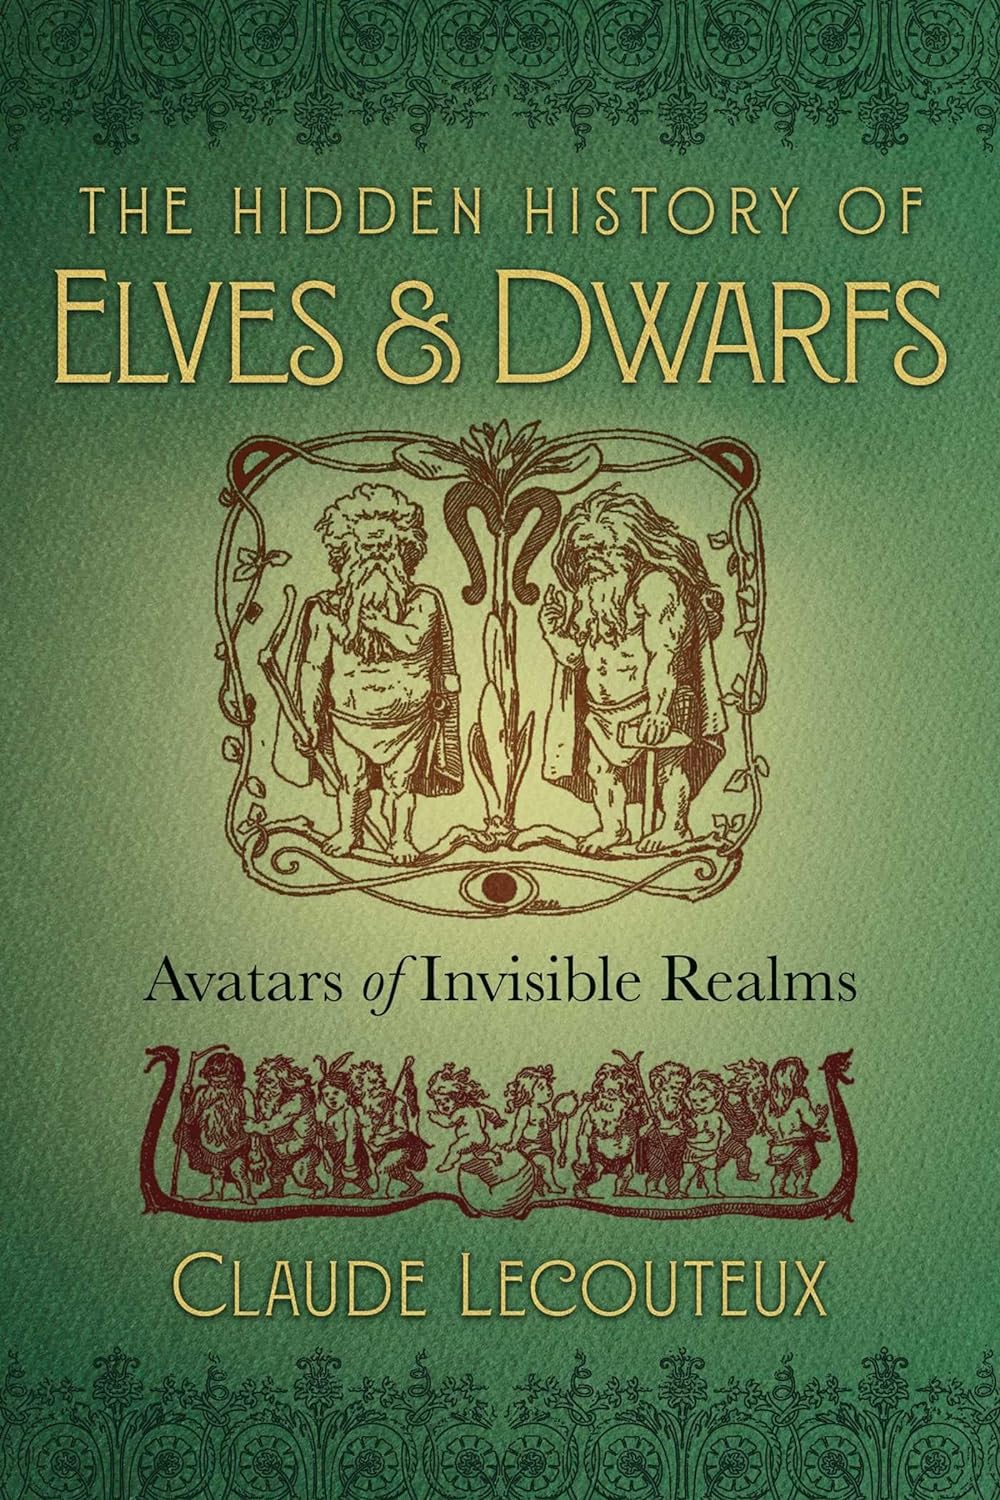 Claude Lecouteux, Régis Boyer: The Hidden History of Elves and Dwarfs (Hardcover, Inner Traditions)